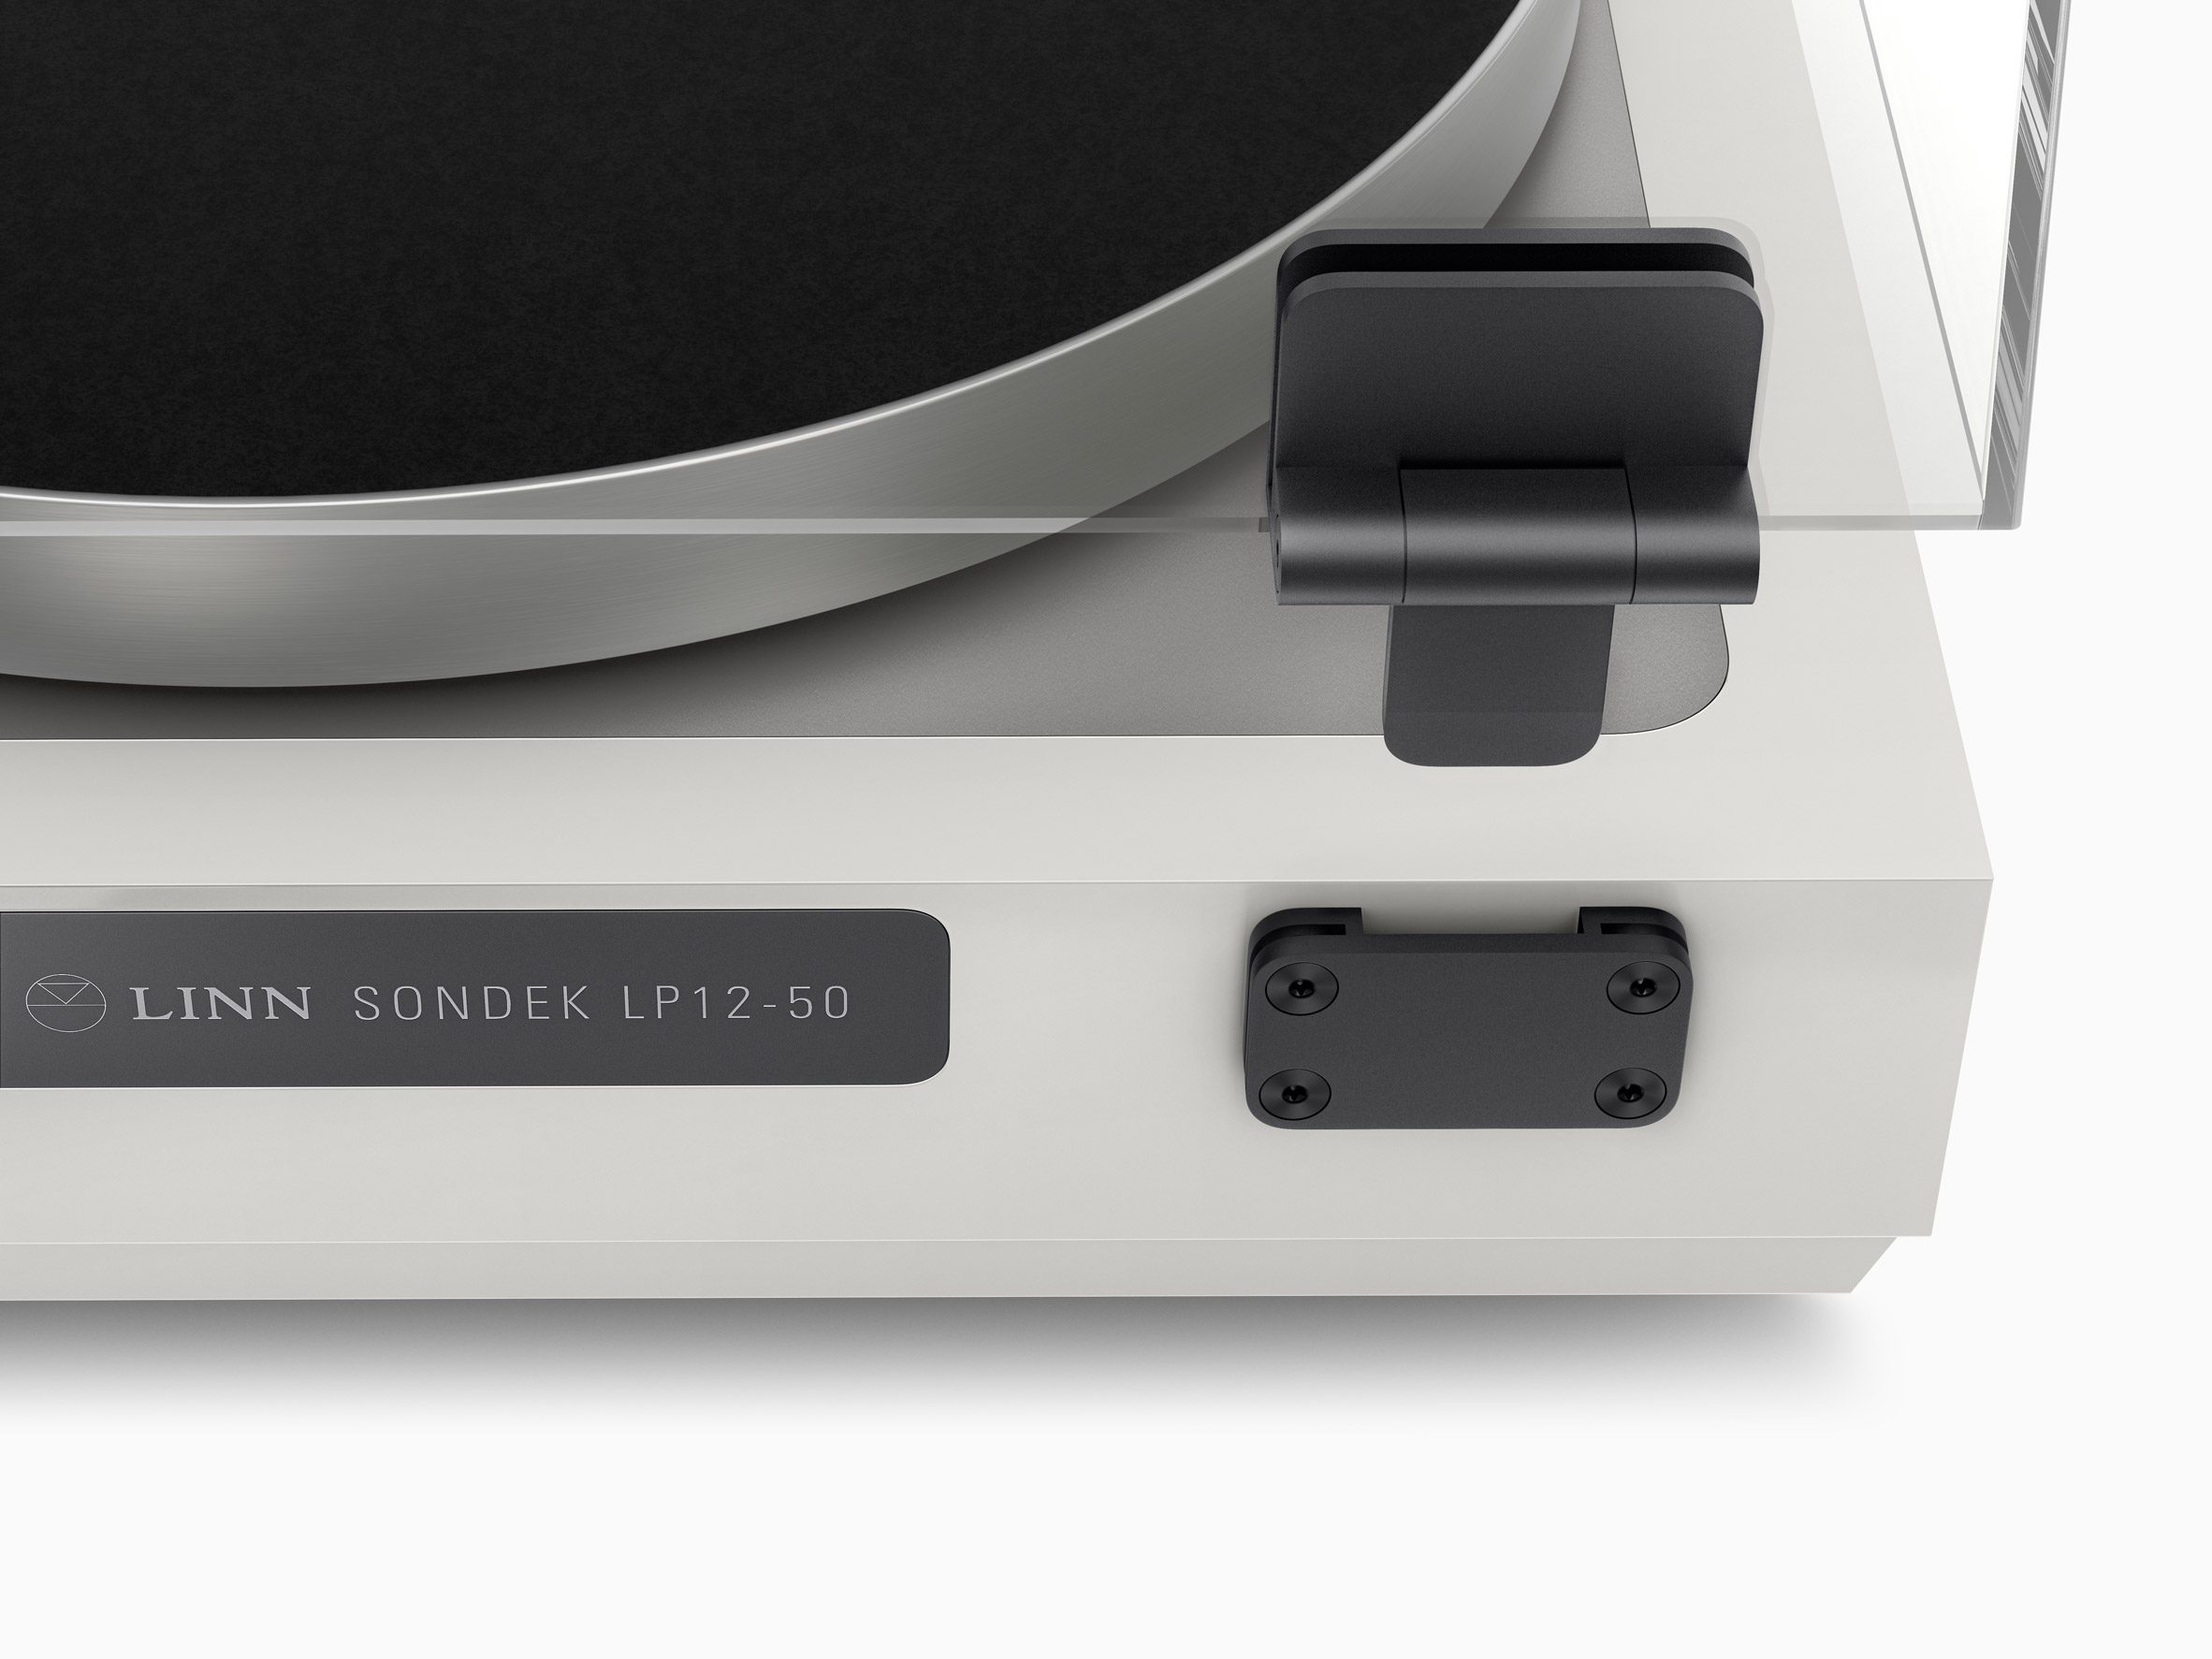 Close-up rendering of the back right corner of the Sondek LP12-50 showing redesigned hinge